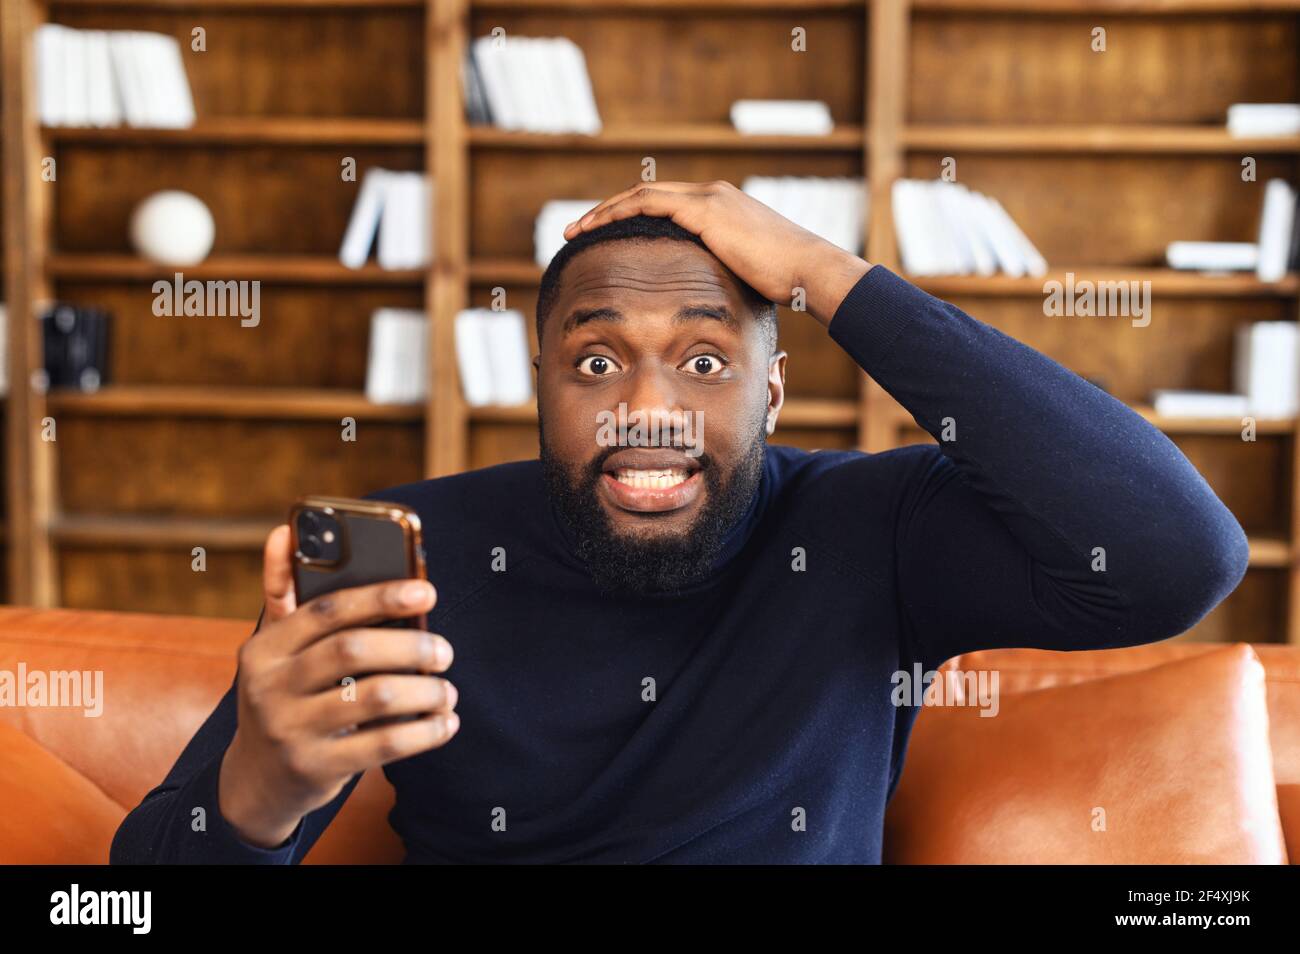 Discouraged African-American man grabbed his head, holding a smartphone, looks at the camera with eyes wide opened, portrait of shocked black guy with phone in hand Stock Photo